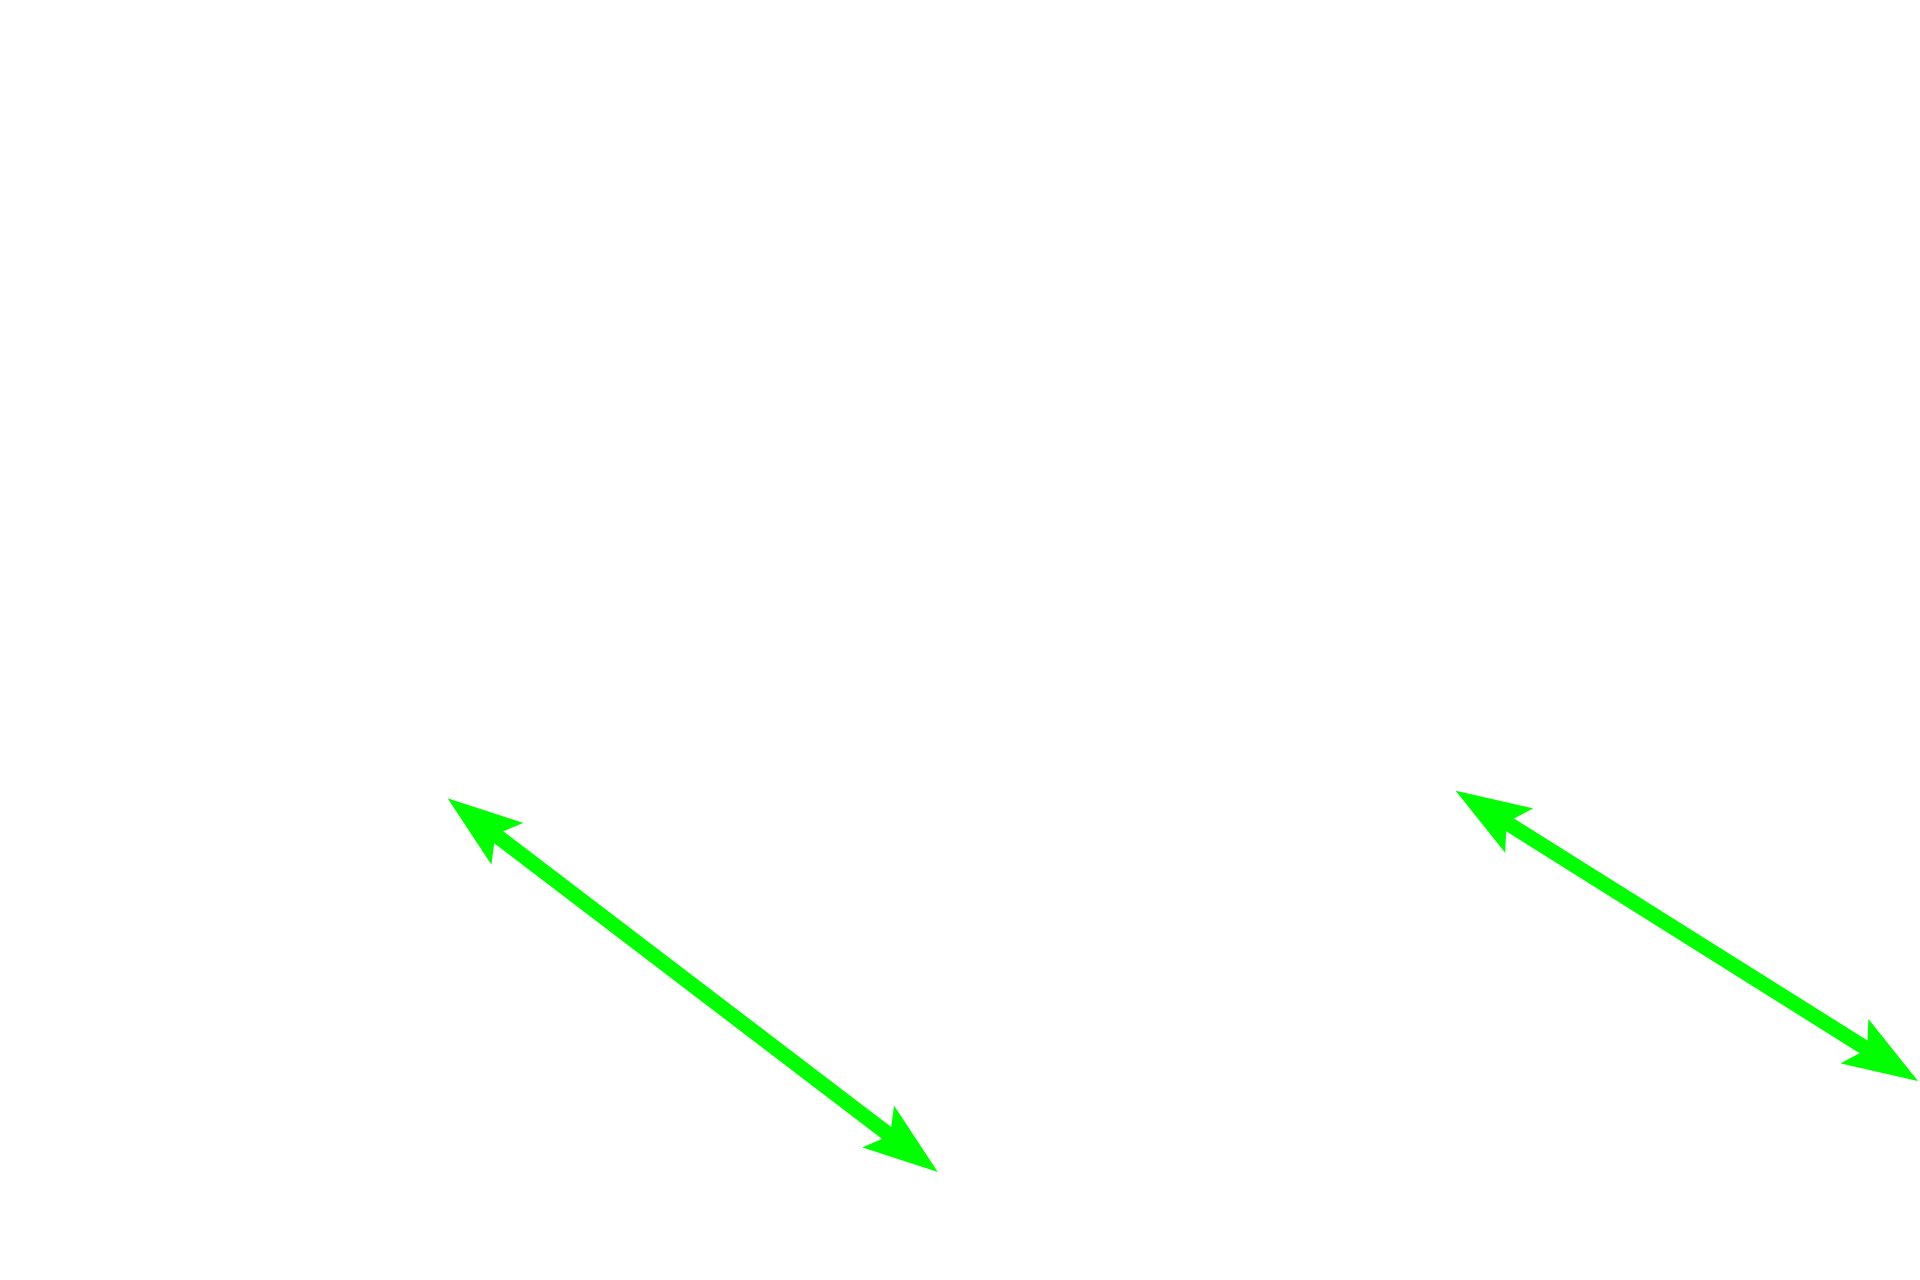 Dentin <p>Dentin is deposited similarly to bone: organic matrix (predentin), deposited first, provides a framework on which hydroxyapatite is laid down to form dentin.  Dentin deposition surrounds long processes of odontoblasts, forming dentinal tubules.  Dentin formation begins at the dentino-enamel junction and proceeds into the pulp, decreasing the volume of pulp as it does so.</p>
